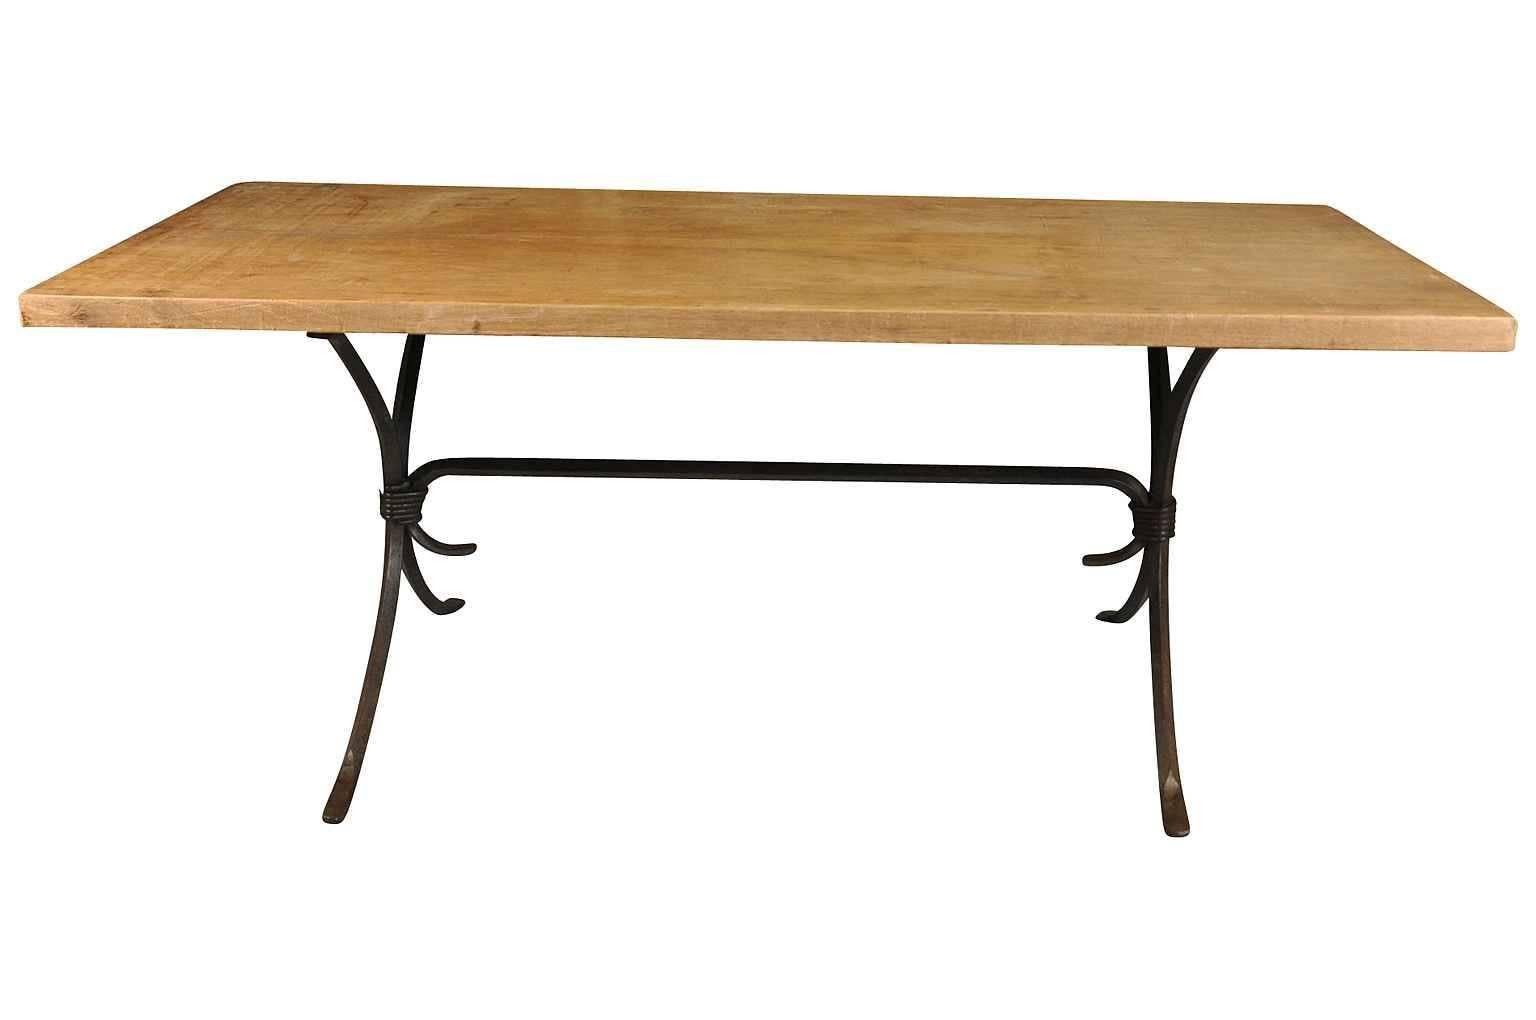 A wonderful early 20th century table from Northern Italy. Handsomely constructed with a fabulous hand-forged iron base and a hand hewn two board walnut top. Serves wonderfully as a writing table as well.